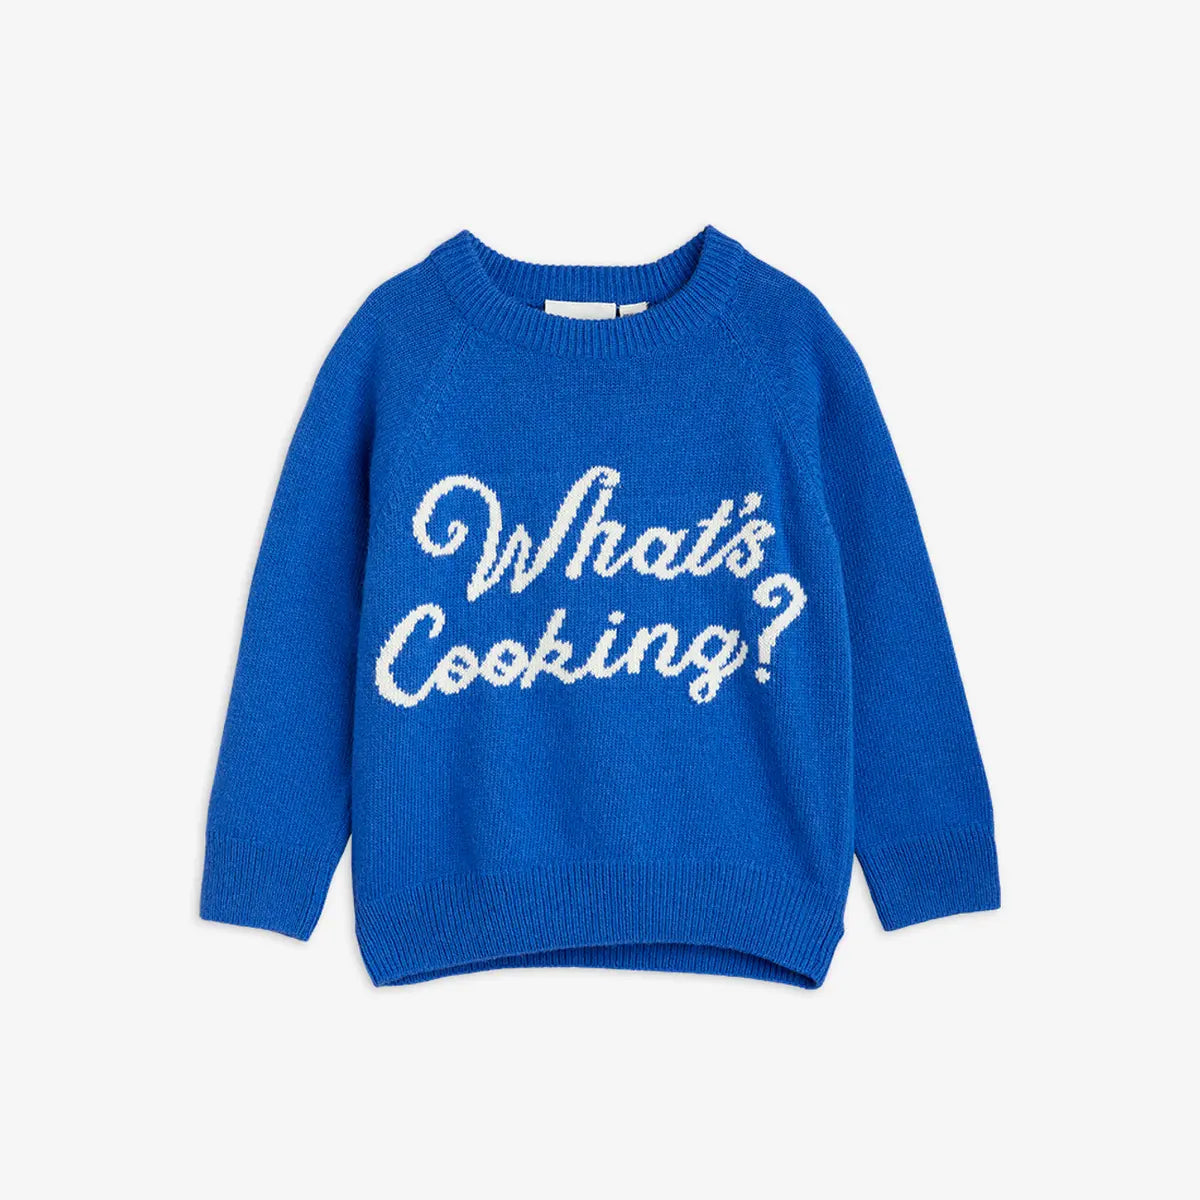 What's Cookin' Knitted Sweater